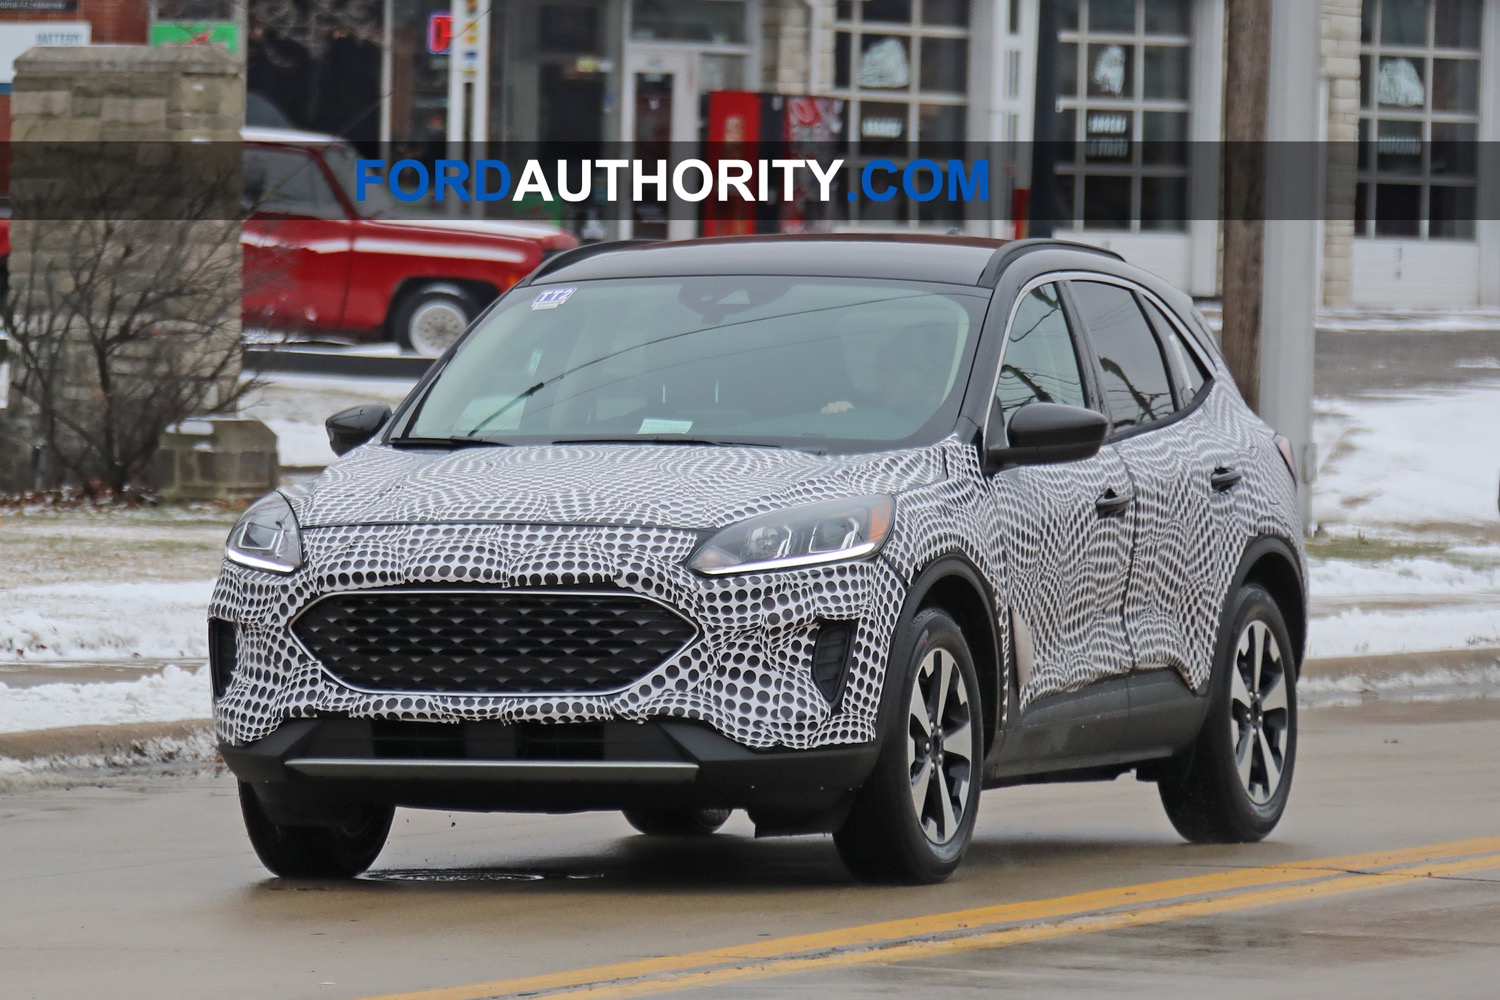 2020 Ford Escape Interior Revealed In New Spy Pictures